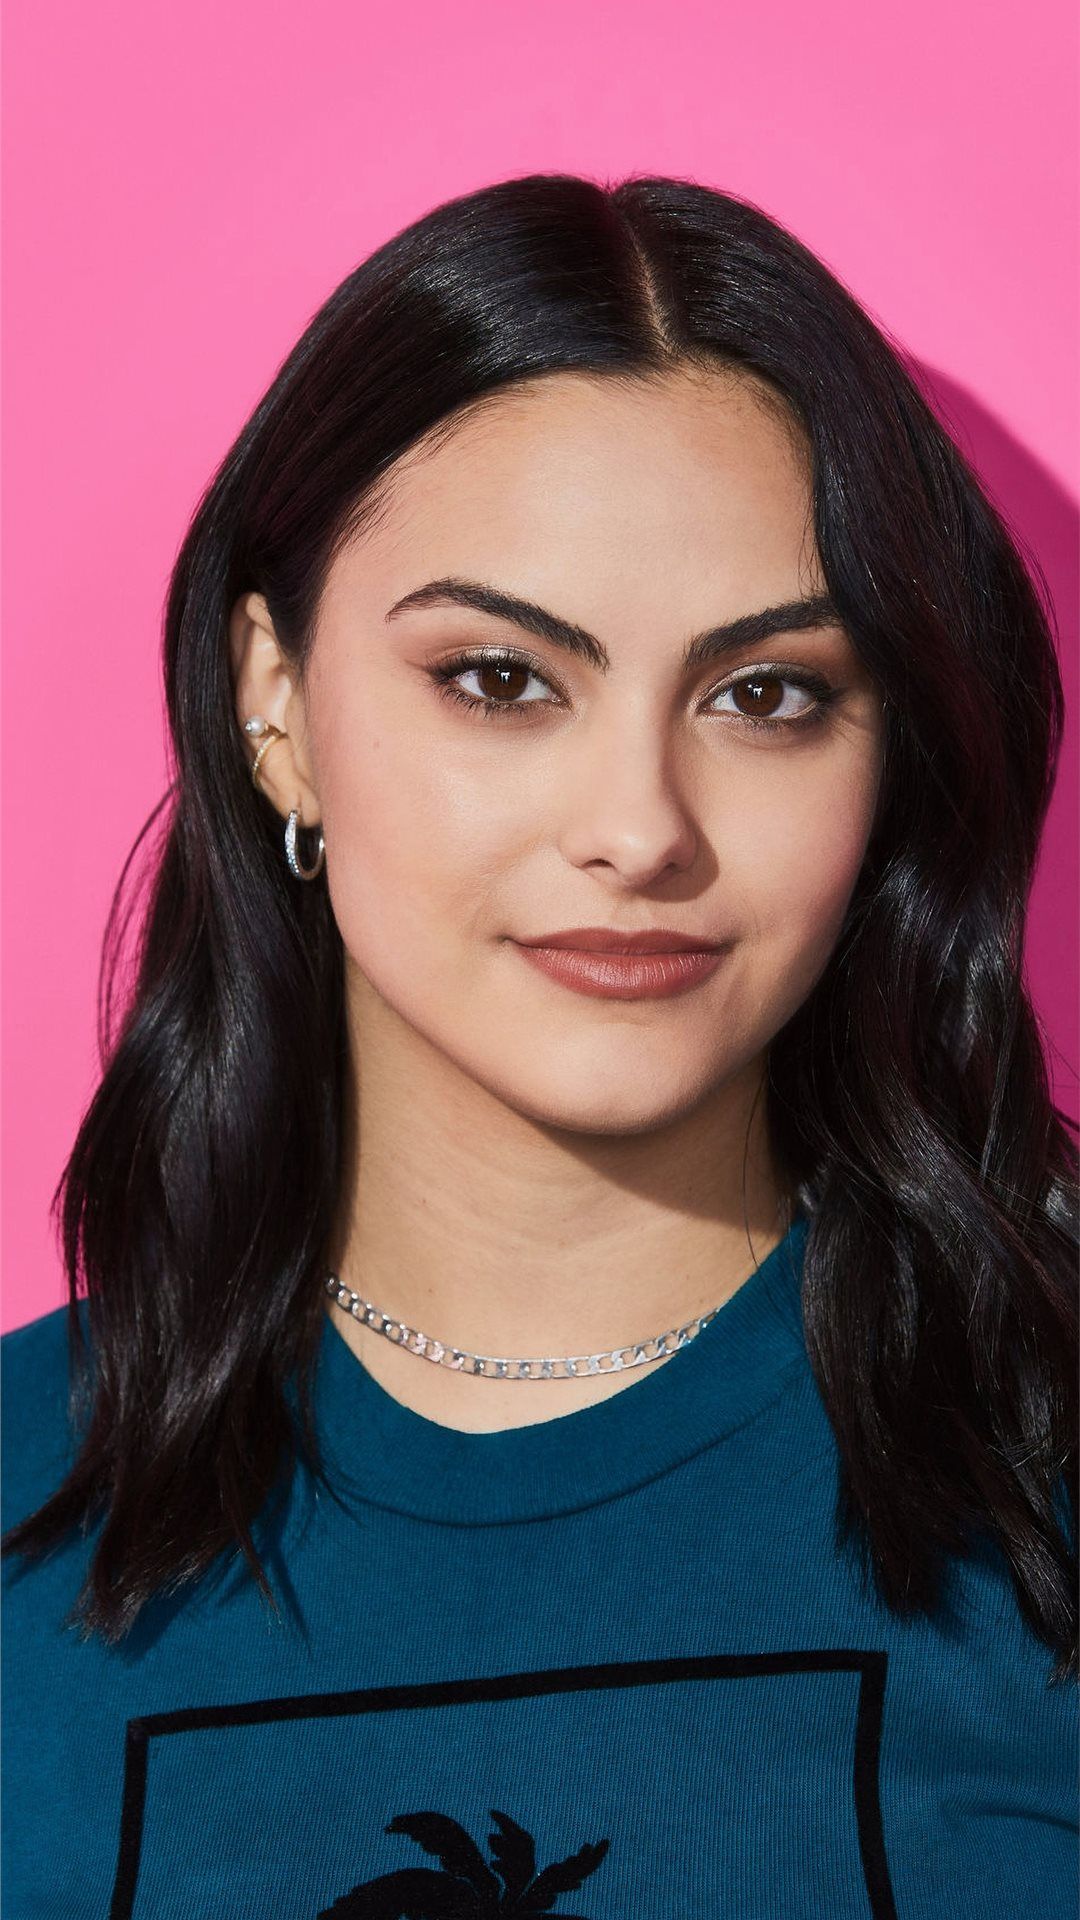 camila mendes portrait new iPhone Wallpaper Free Download